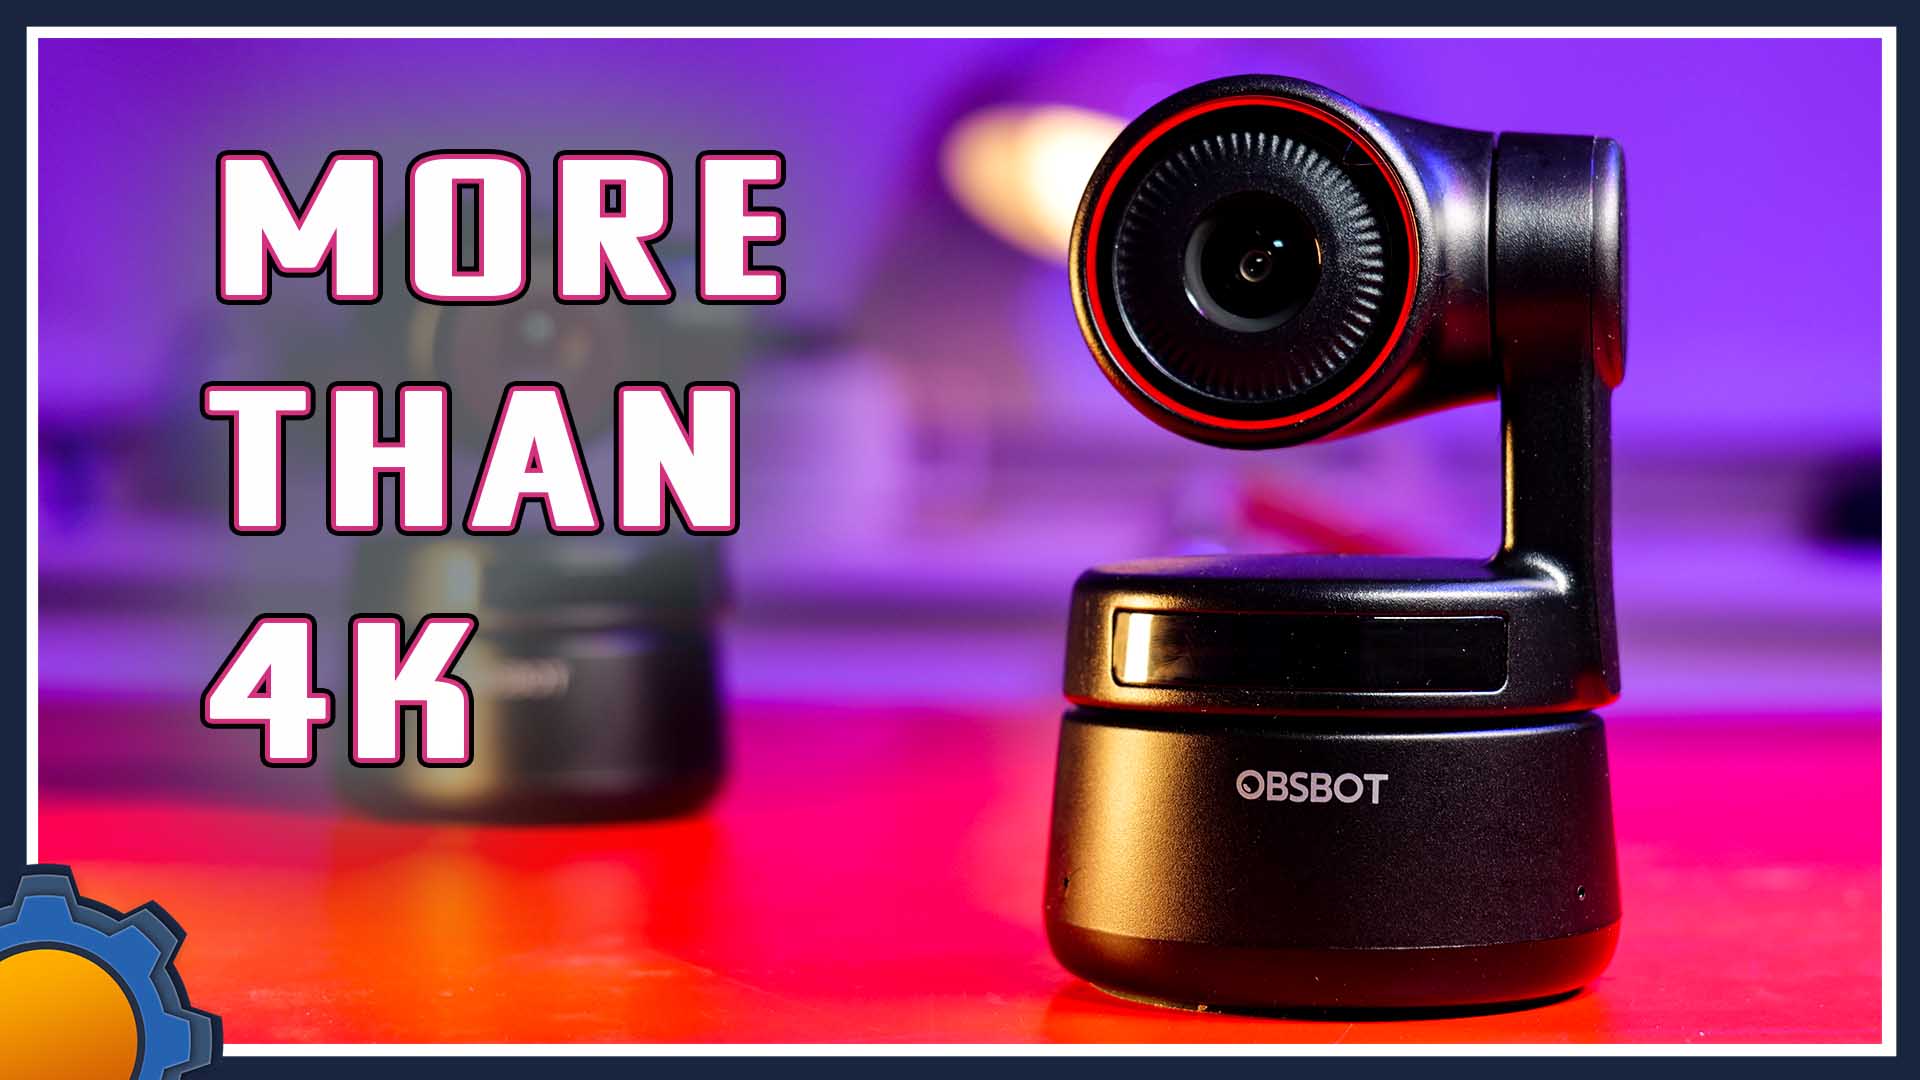 OBSBOT Tiny 4K - now, with something cooler than 4K - NotEnoughTech